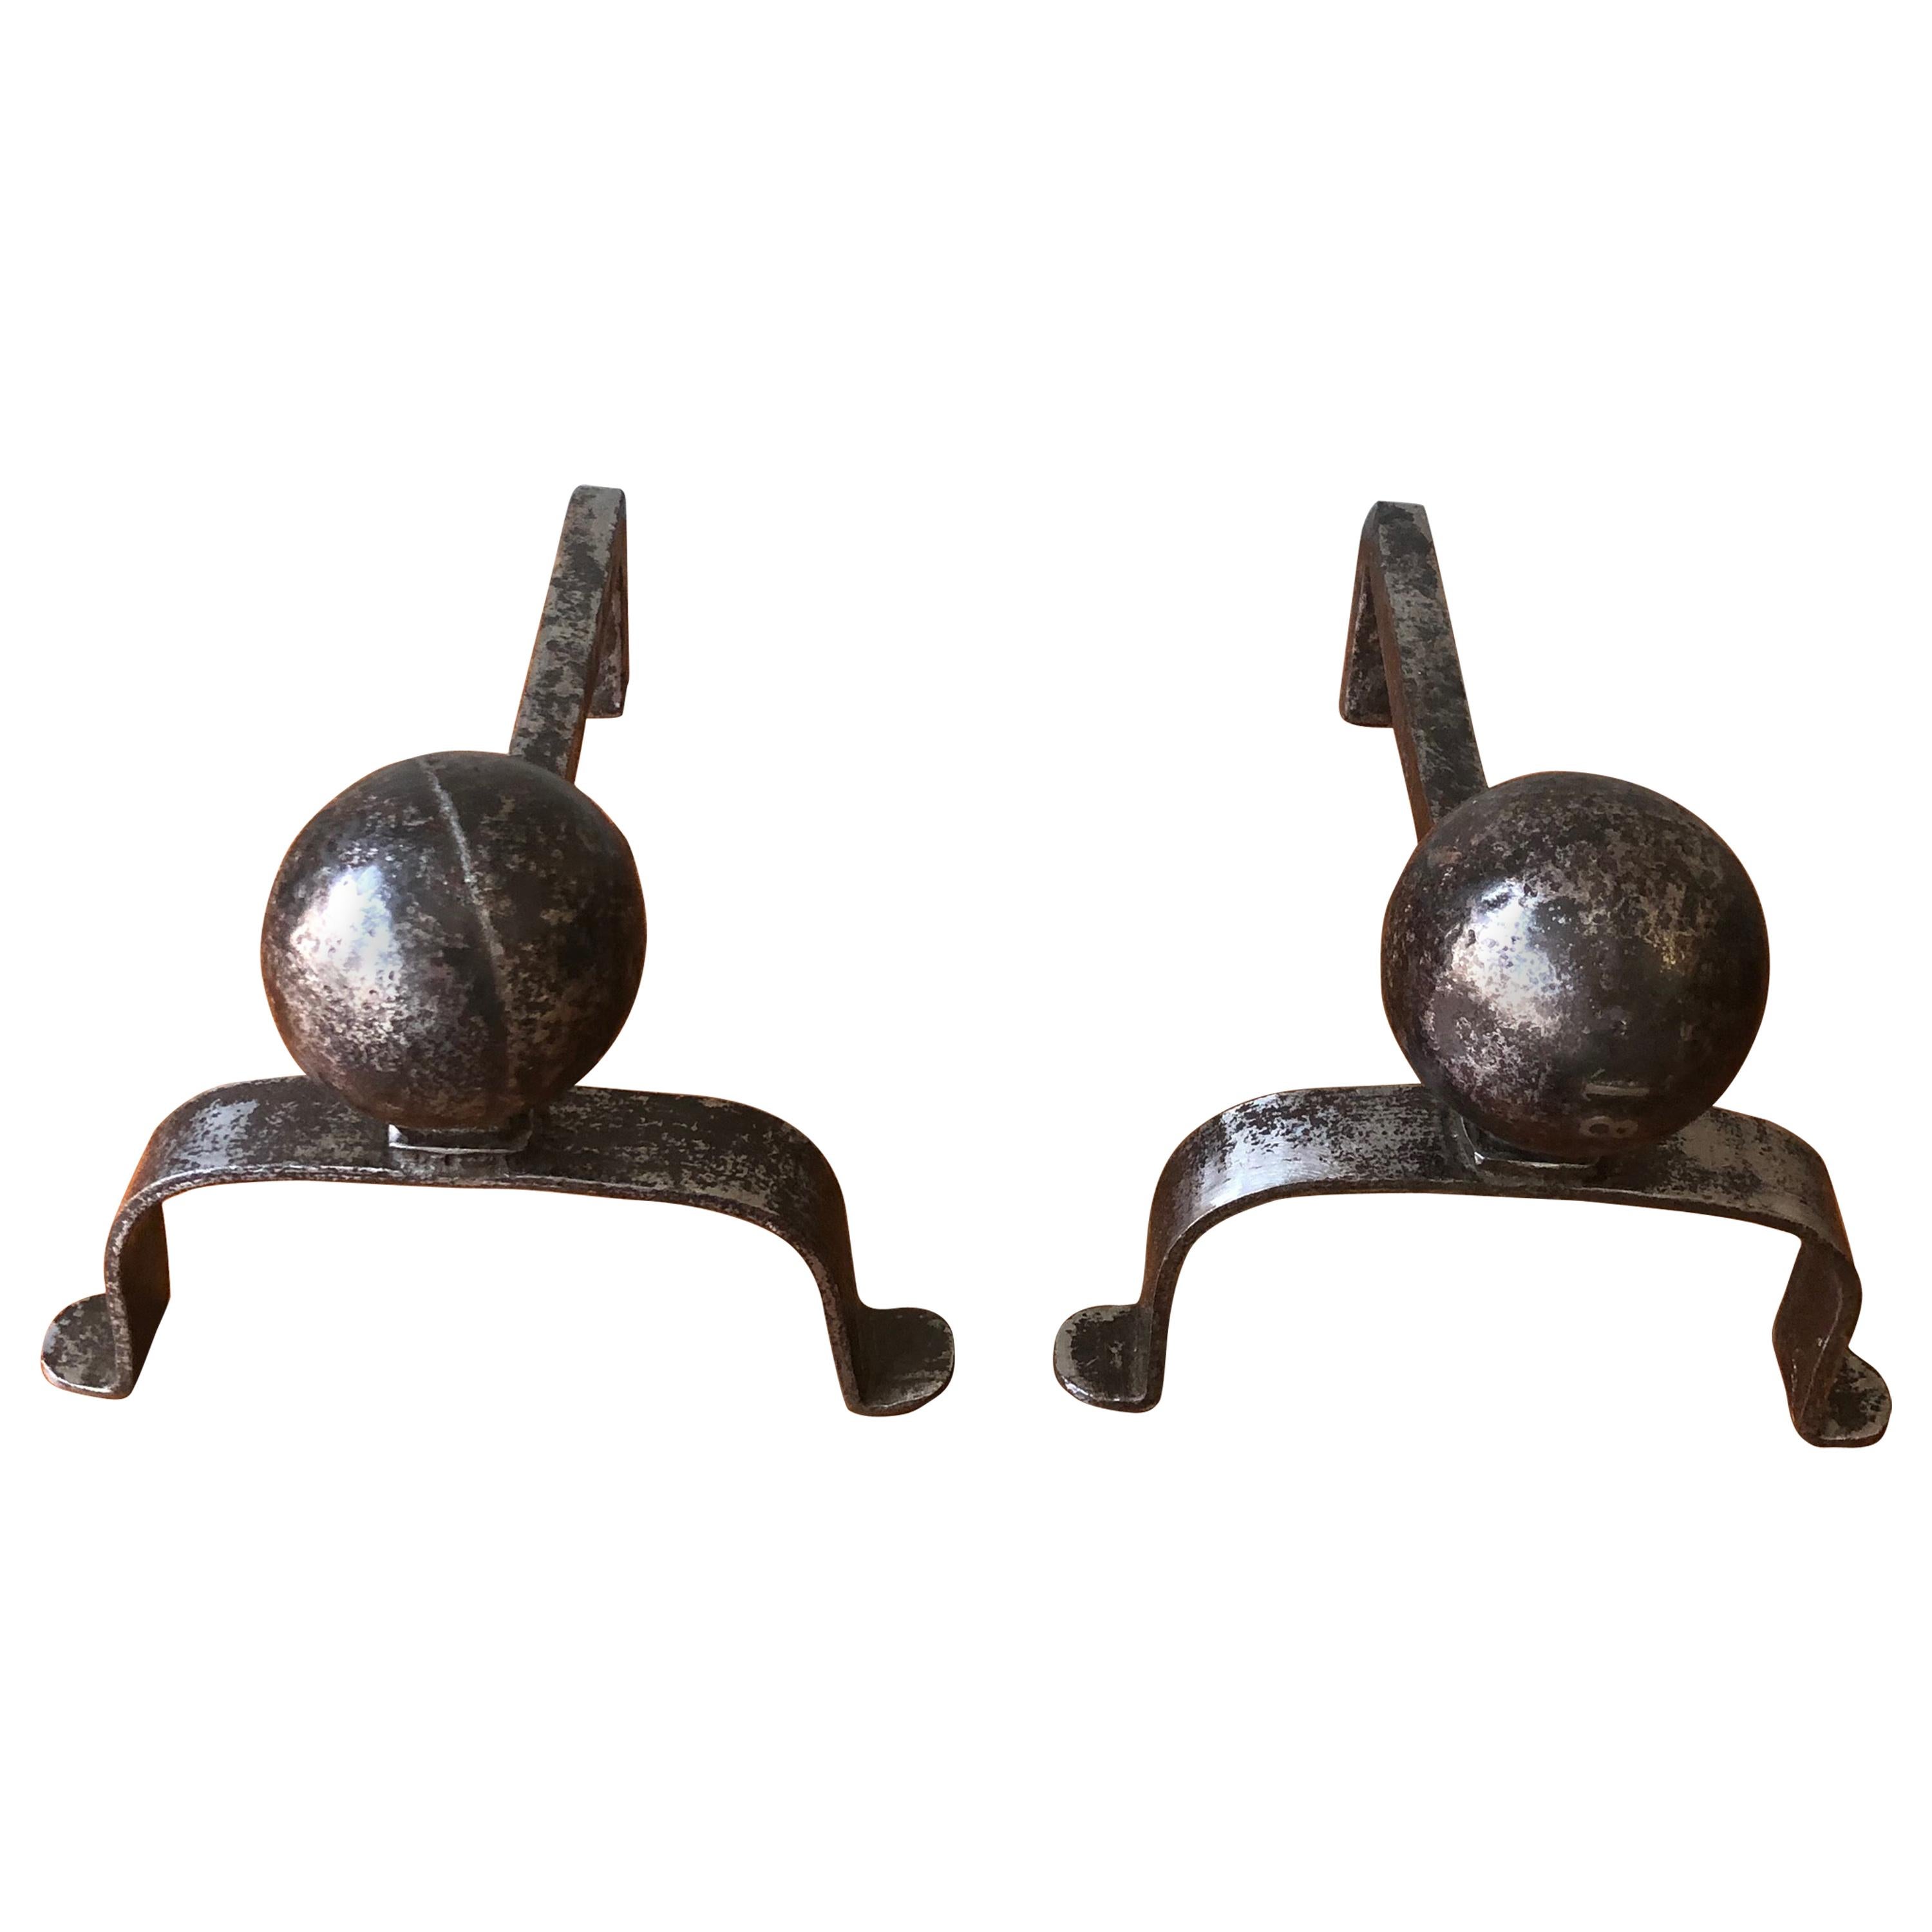 Pair of Small Polished Iron Andirons with Large Ball Mounts